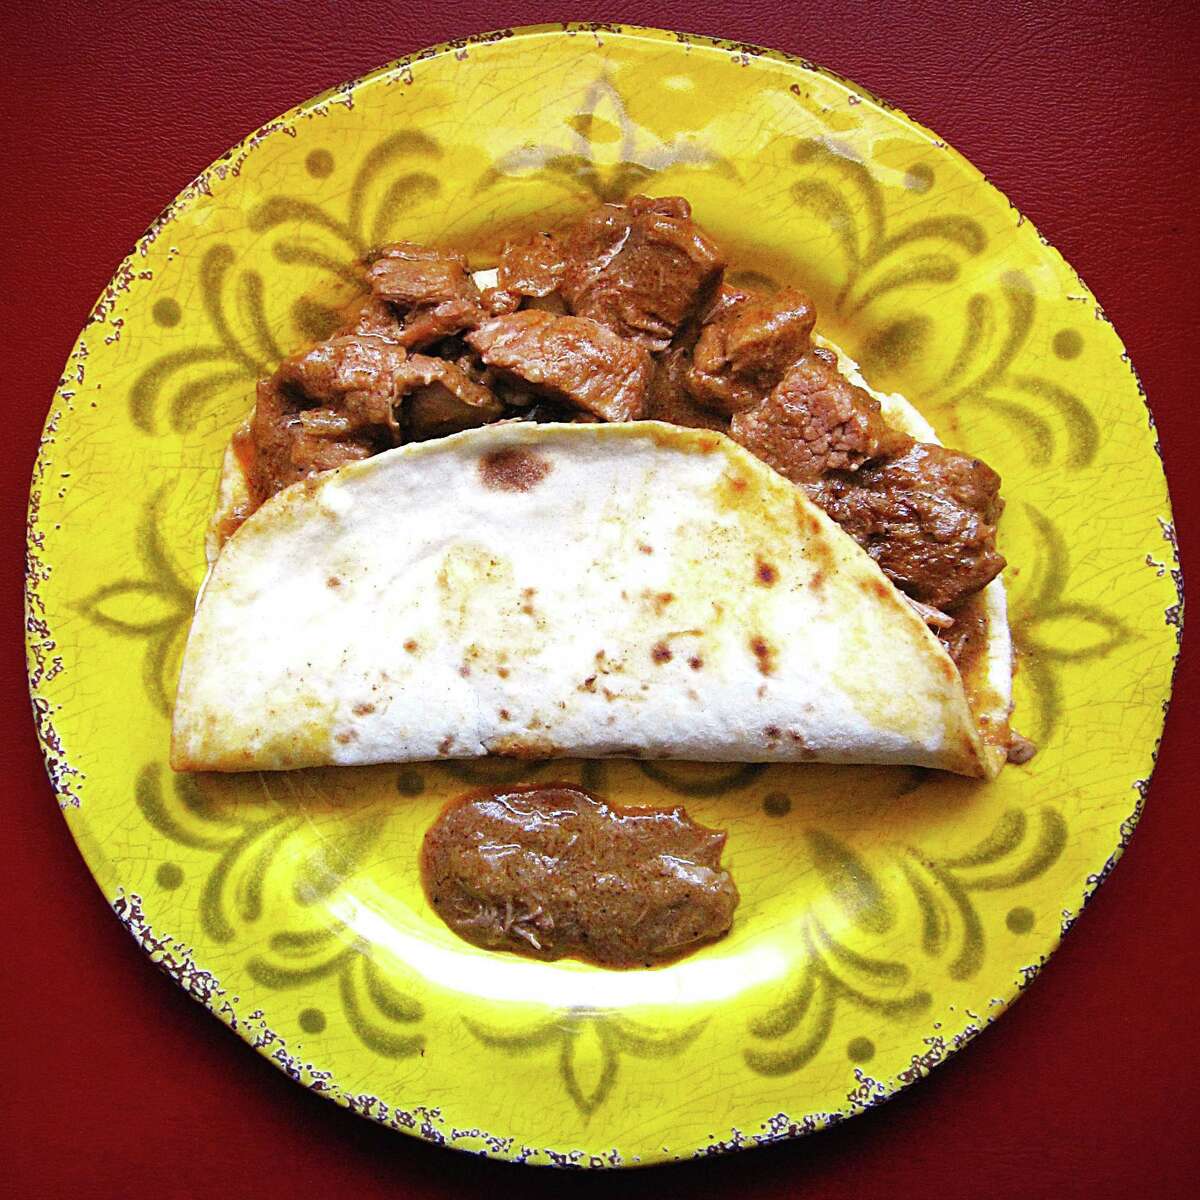 Carne guisada taco on a handmade flour tortilla from Norma's Place.